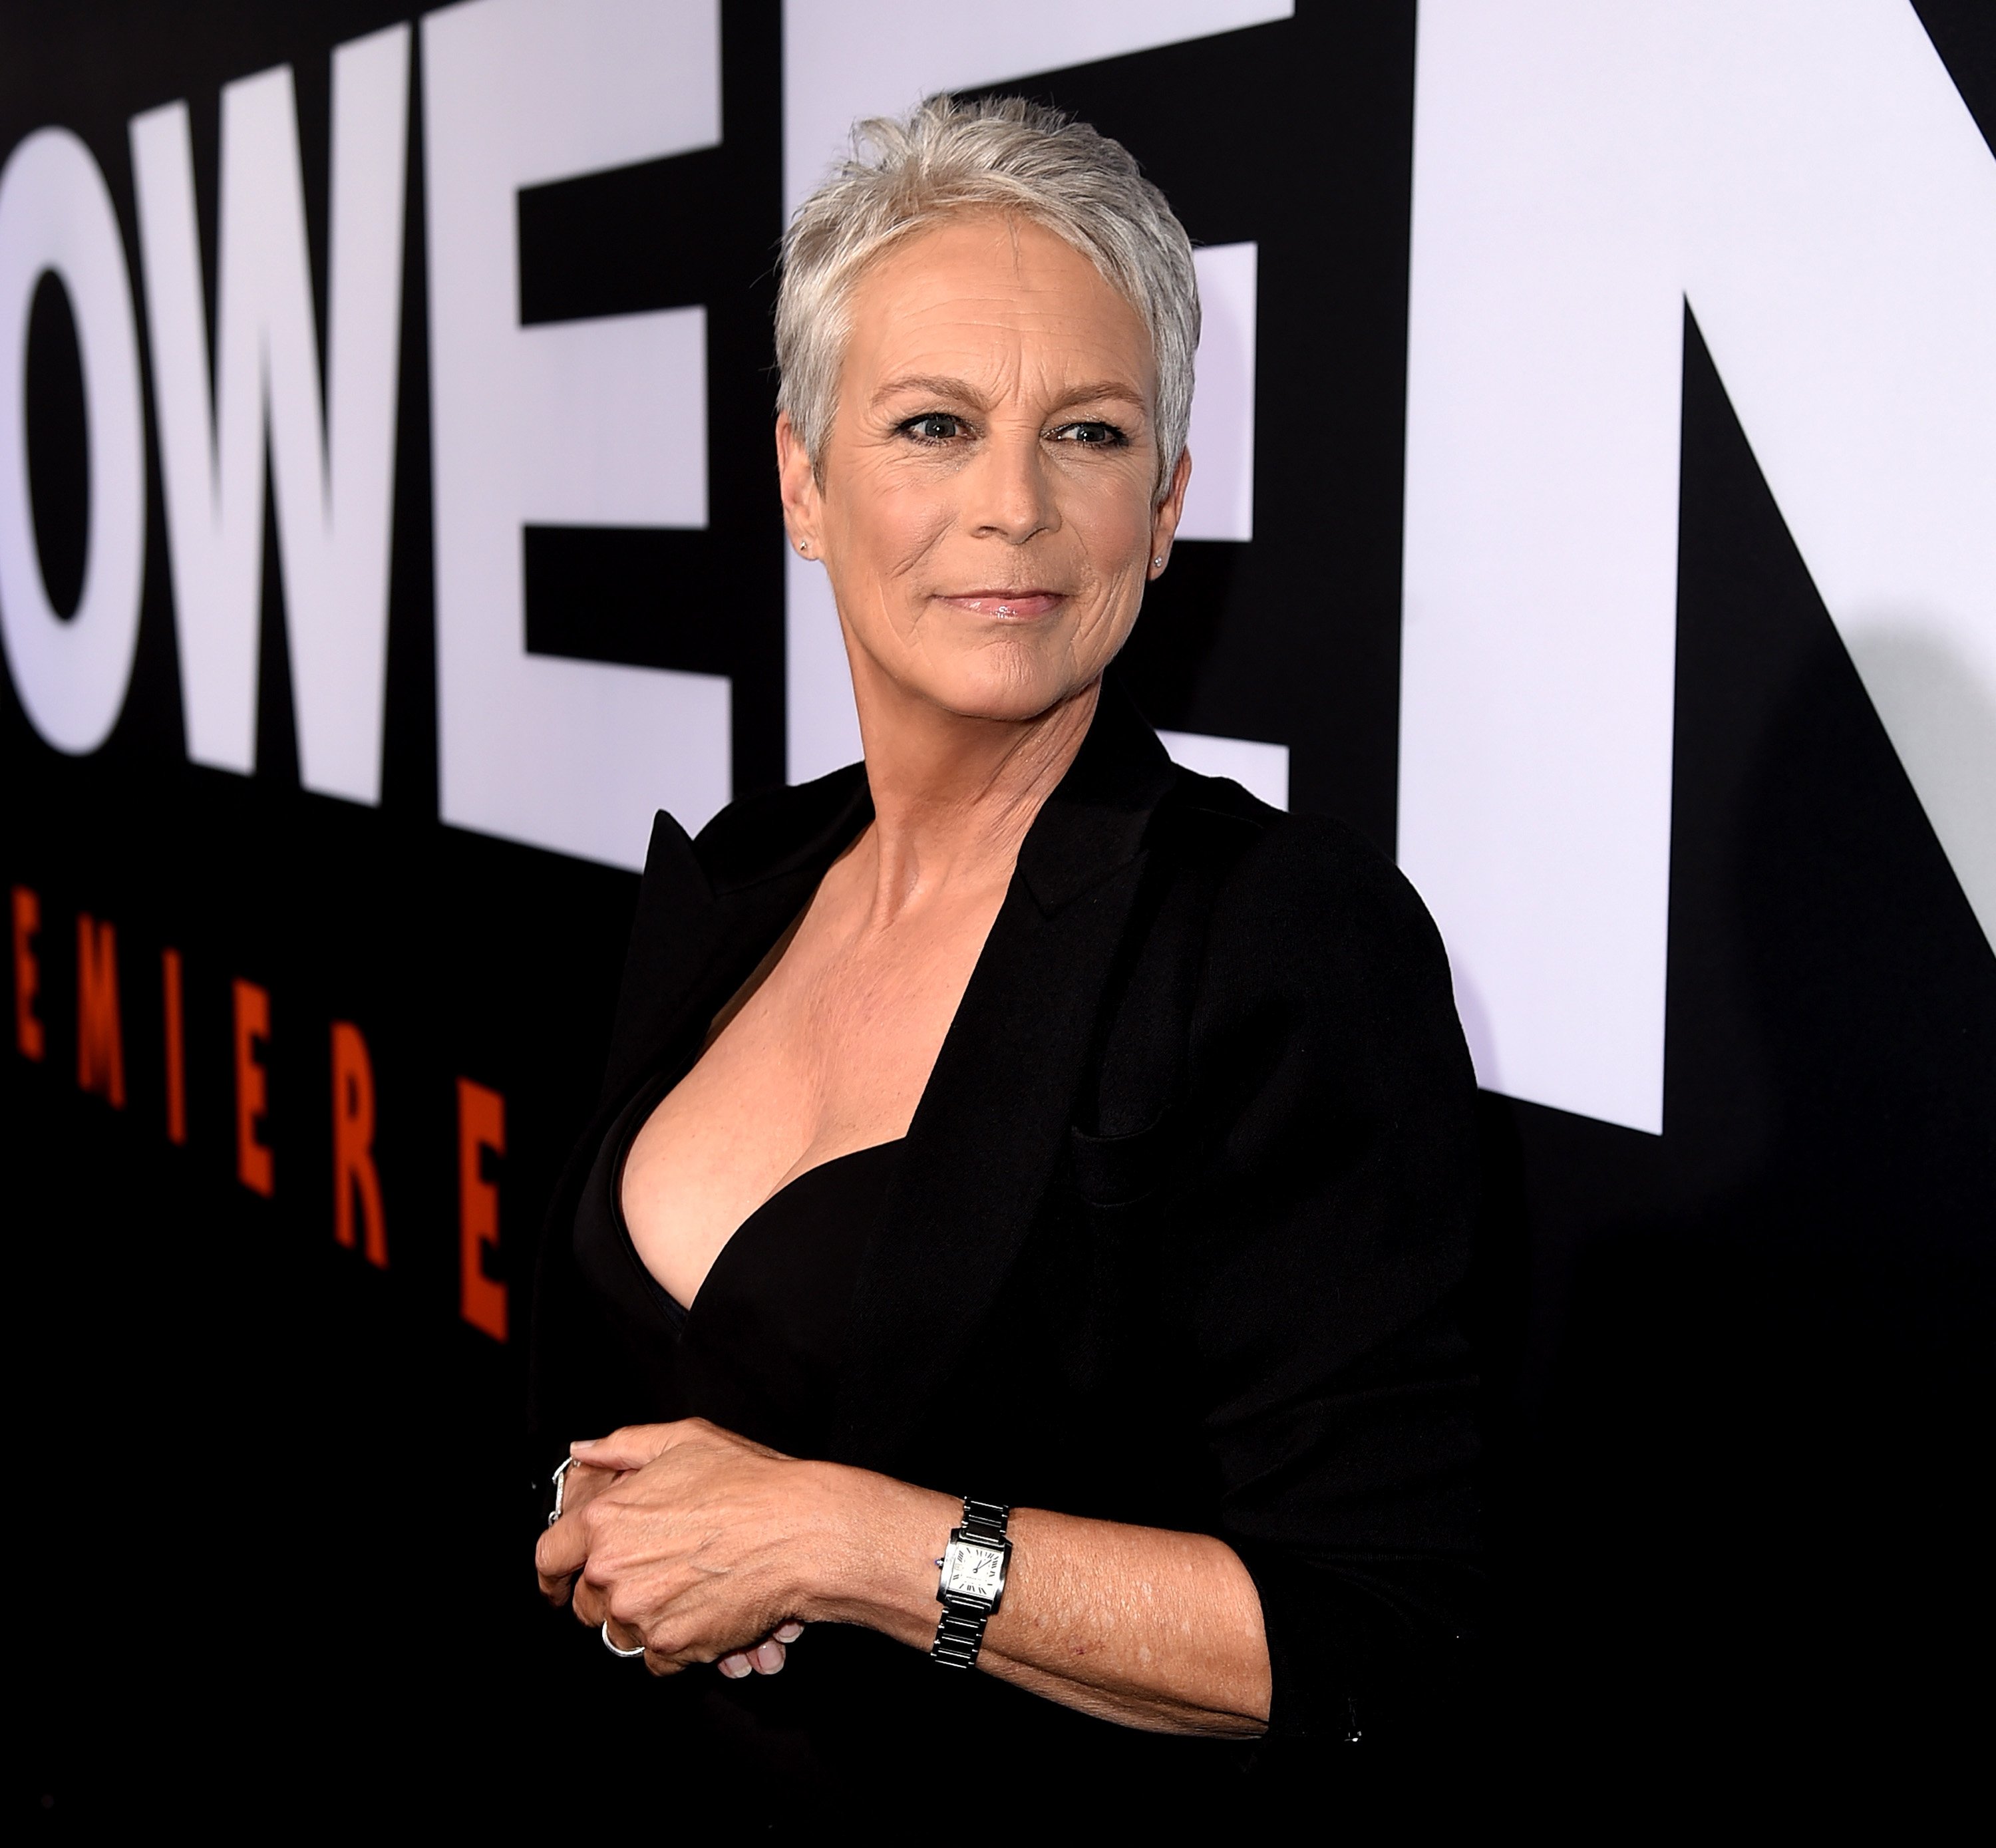 Jamie Lee Curtis at the premiere of Universal Pictures' "Halloween" at the TCL Chinese Theatre on October 17, 2018. | Source: Getty Image